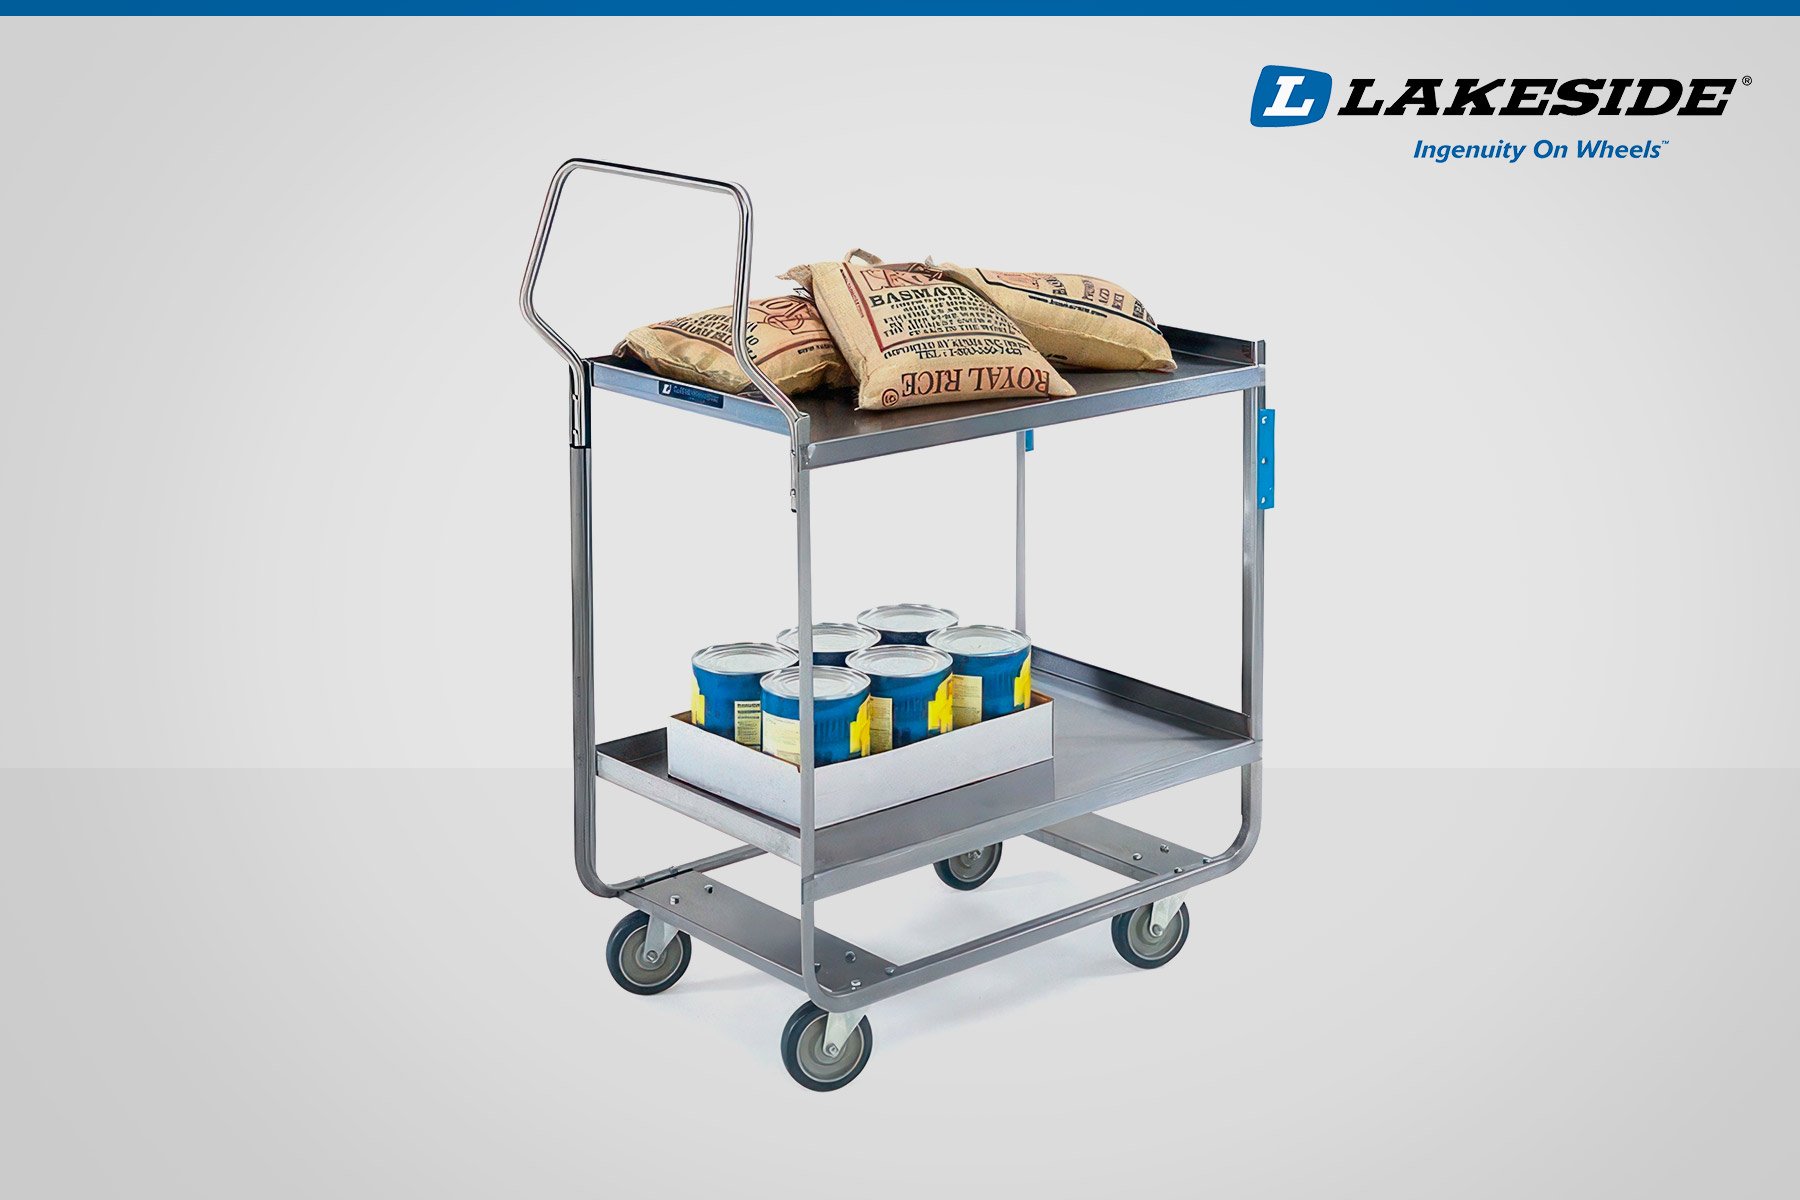 https://www.samtell.com/hs-fs/hubfs/Blogs/SamTell-Blog-Everything-You-Need-to-Know-About-Lakeside-Utility-Carts.jpg?width=1800&name=SamTell-Blog-Everything-You-Need-to-Know-About-Lakeside-Utility-Carts.jpg